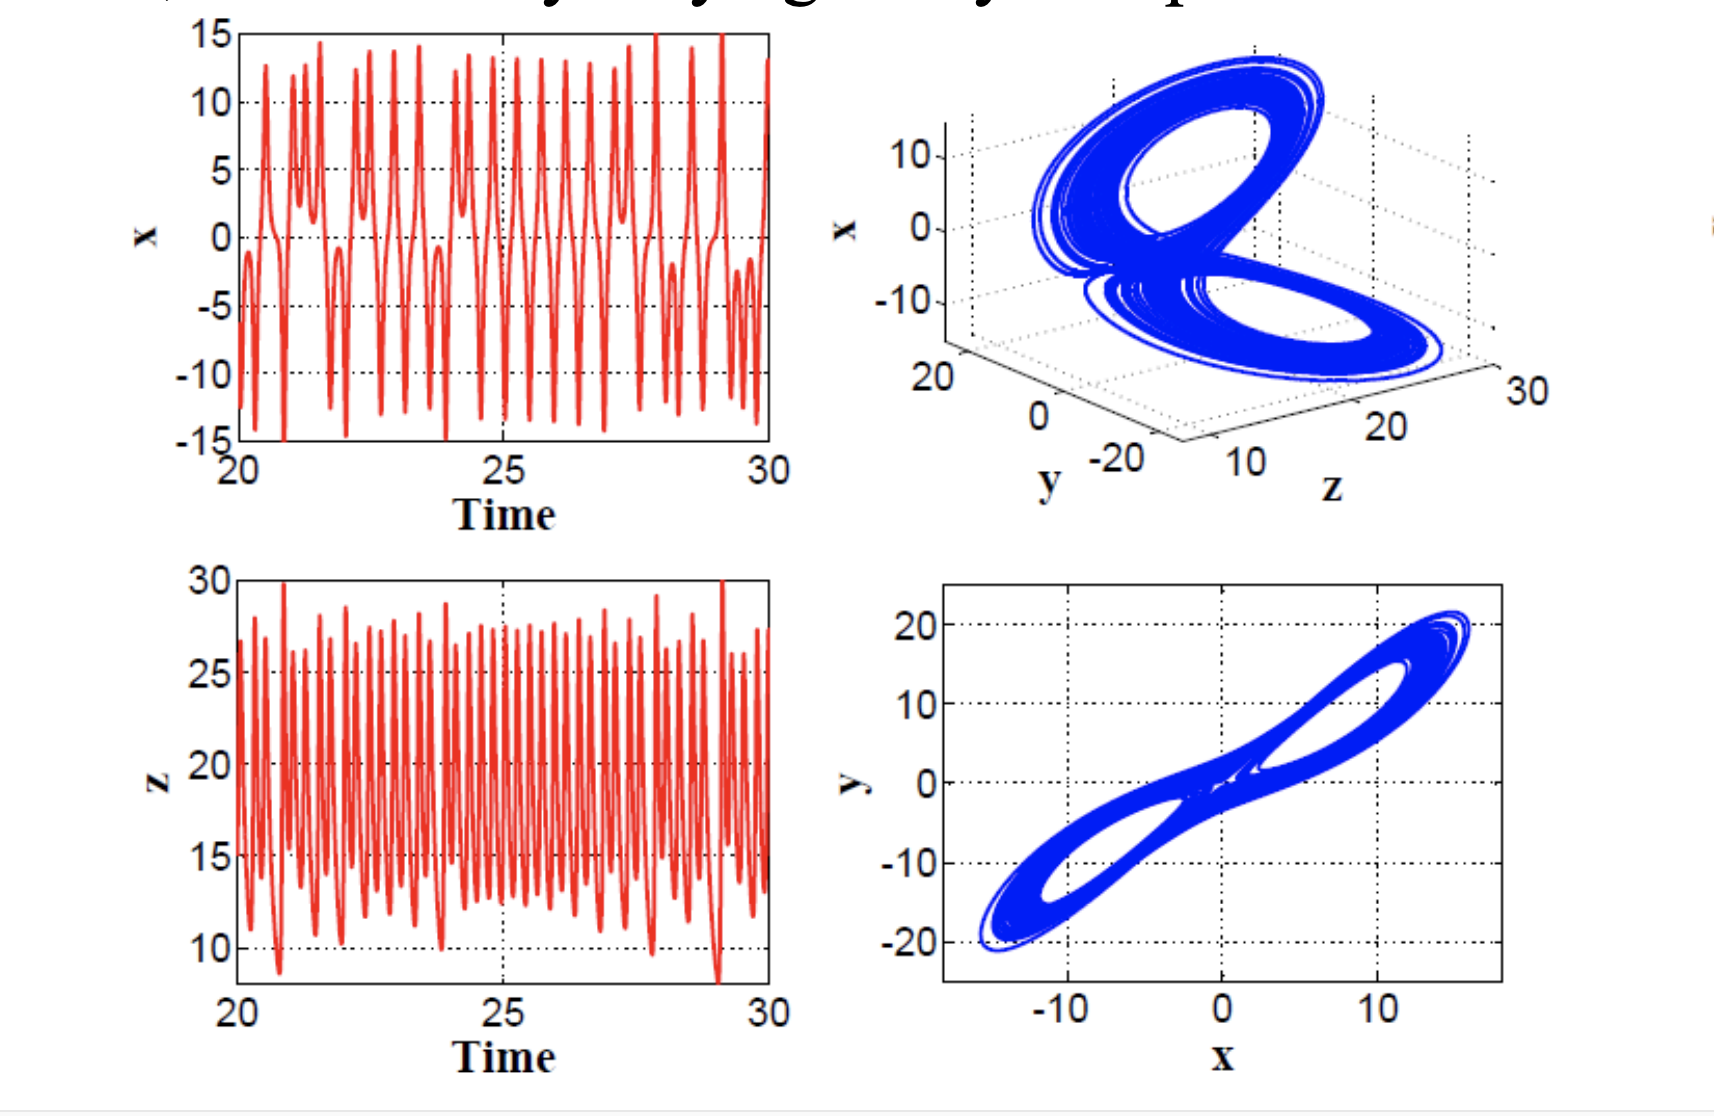 Parametric control on fractional-order response for Lü chaotic system